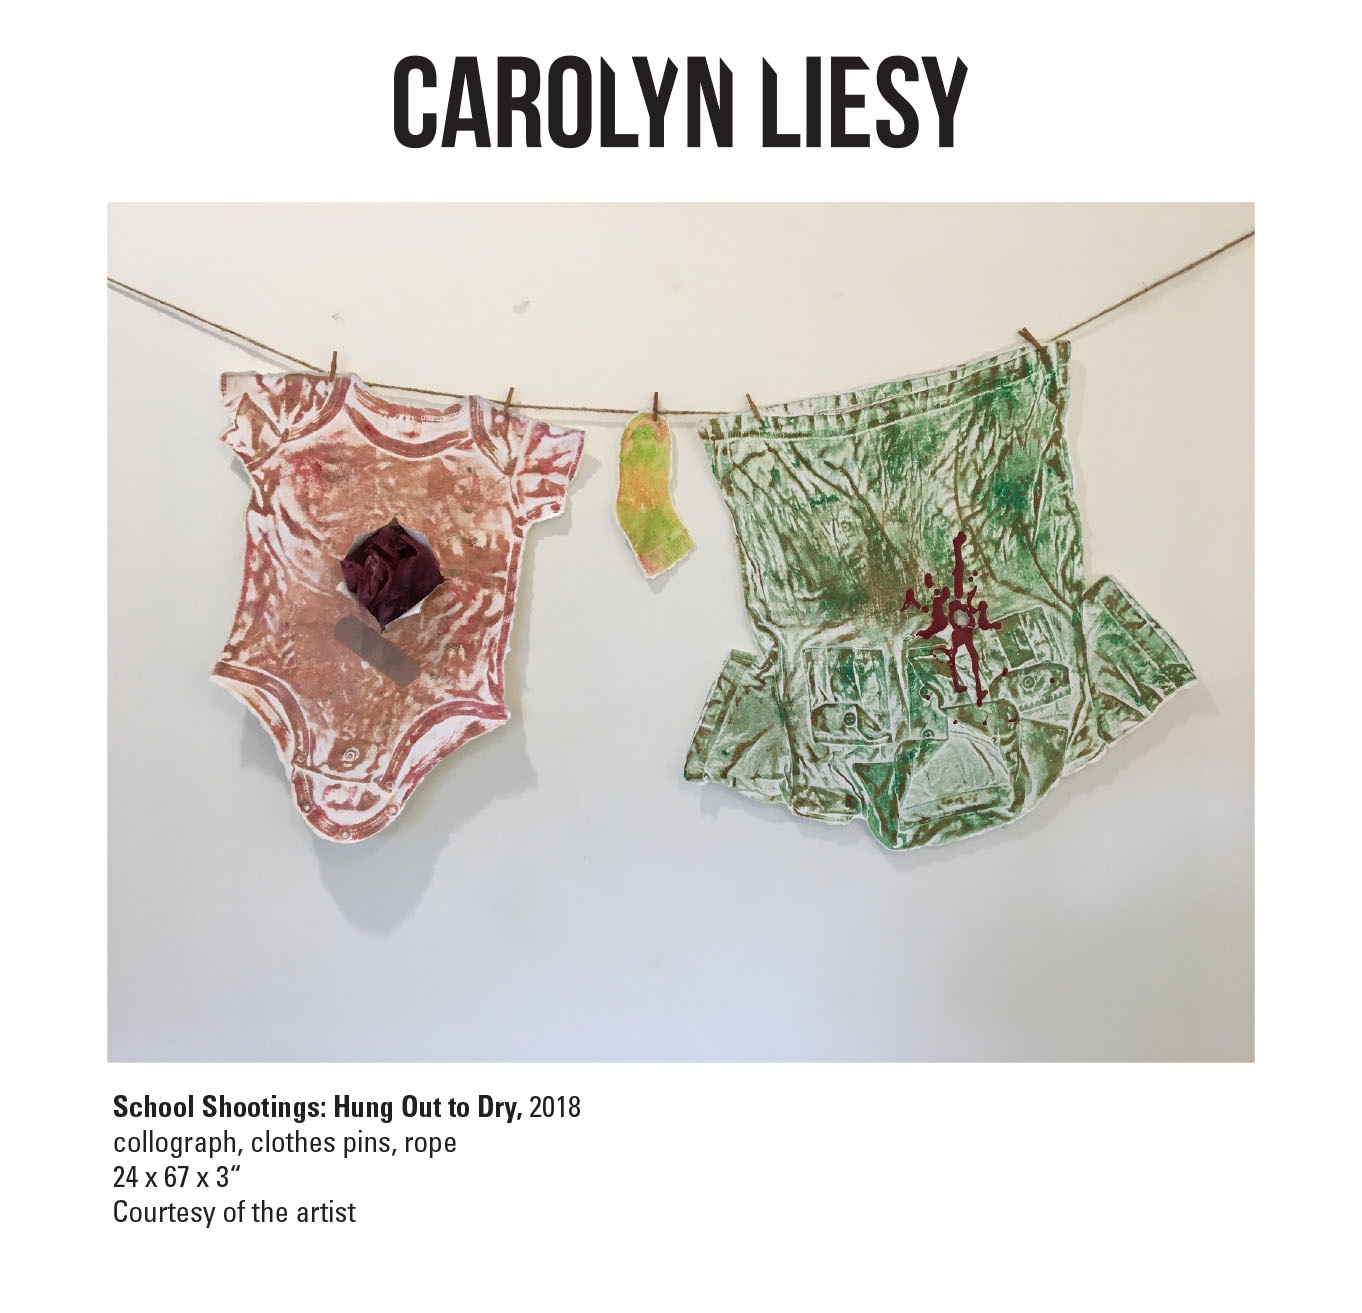 Carolyn Liesy, School Shootings: Hung Out to Dry, 2018. Collograph, clothes pins, rope. 24 x 67 x 3“ Courtesy of the artist. Two shirts hanging on a wire